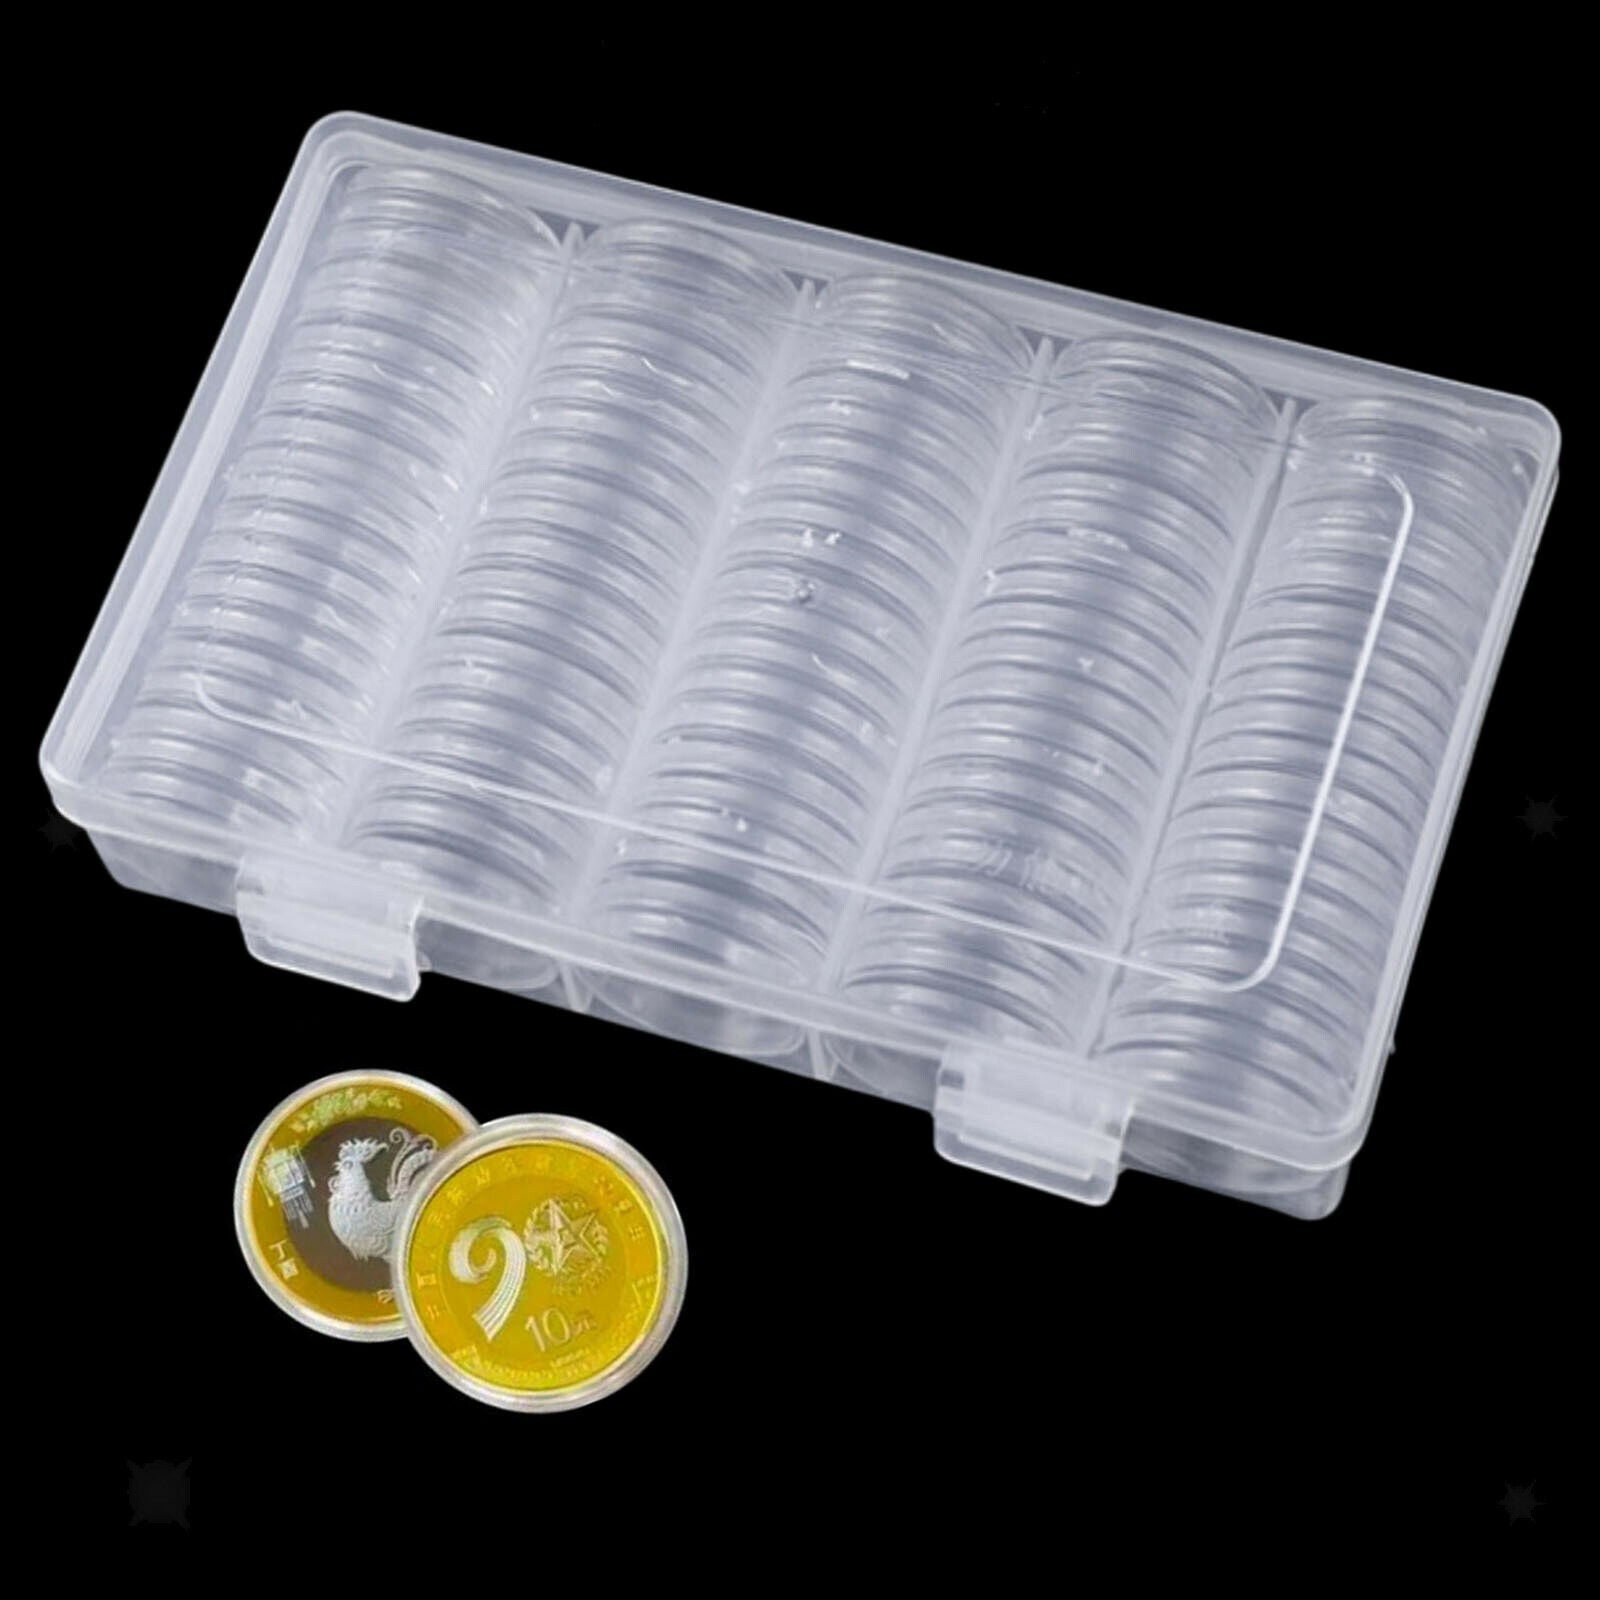 100x 25mm Coin Capsules w/Storage Organizer Box for Coin Collection Supplies